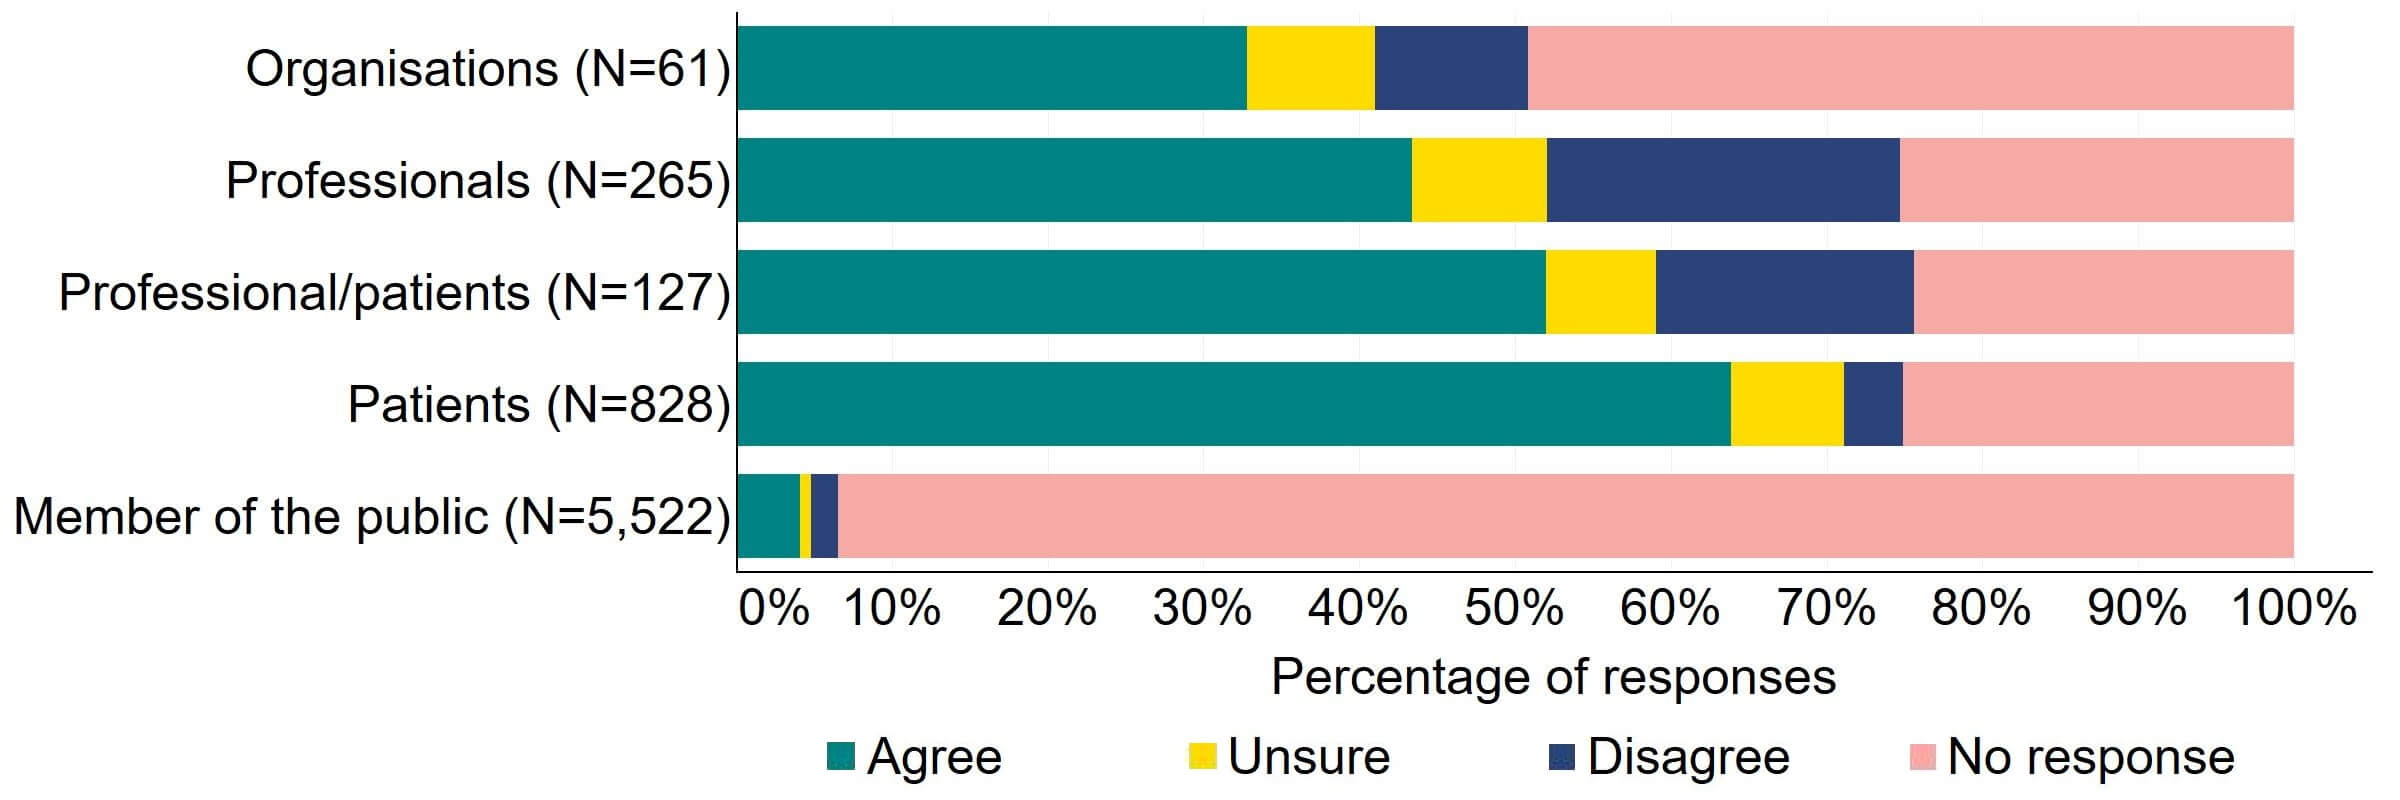 Figure 4 is a stacked bar chart showing the proportion of respondents in each response group who agreed, disagreed, were unsure, or who did not provide a response to the proposal. The underlying data can be downloaded as an Excel worksheet at the top of the page.